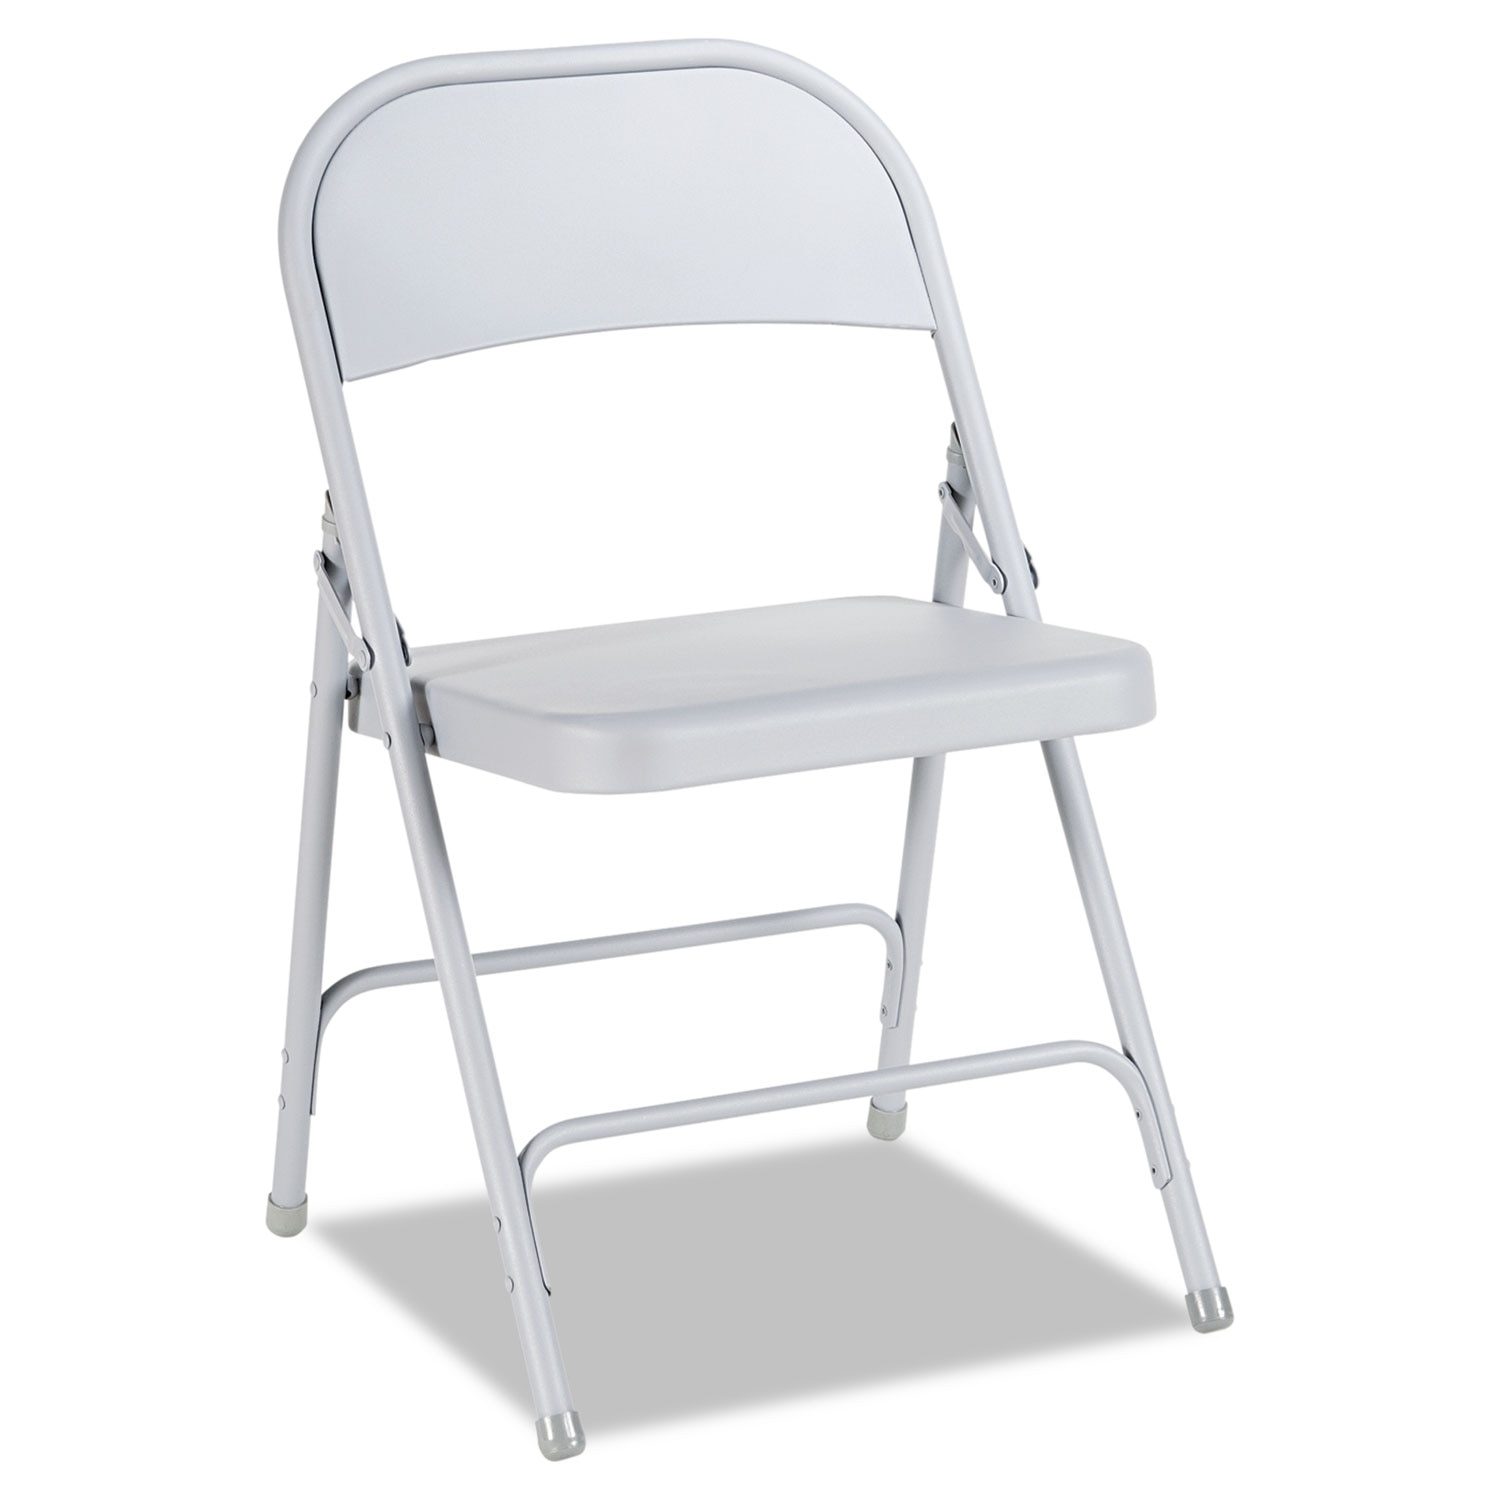 steel folding chairs for sale